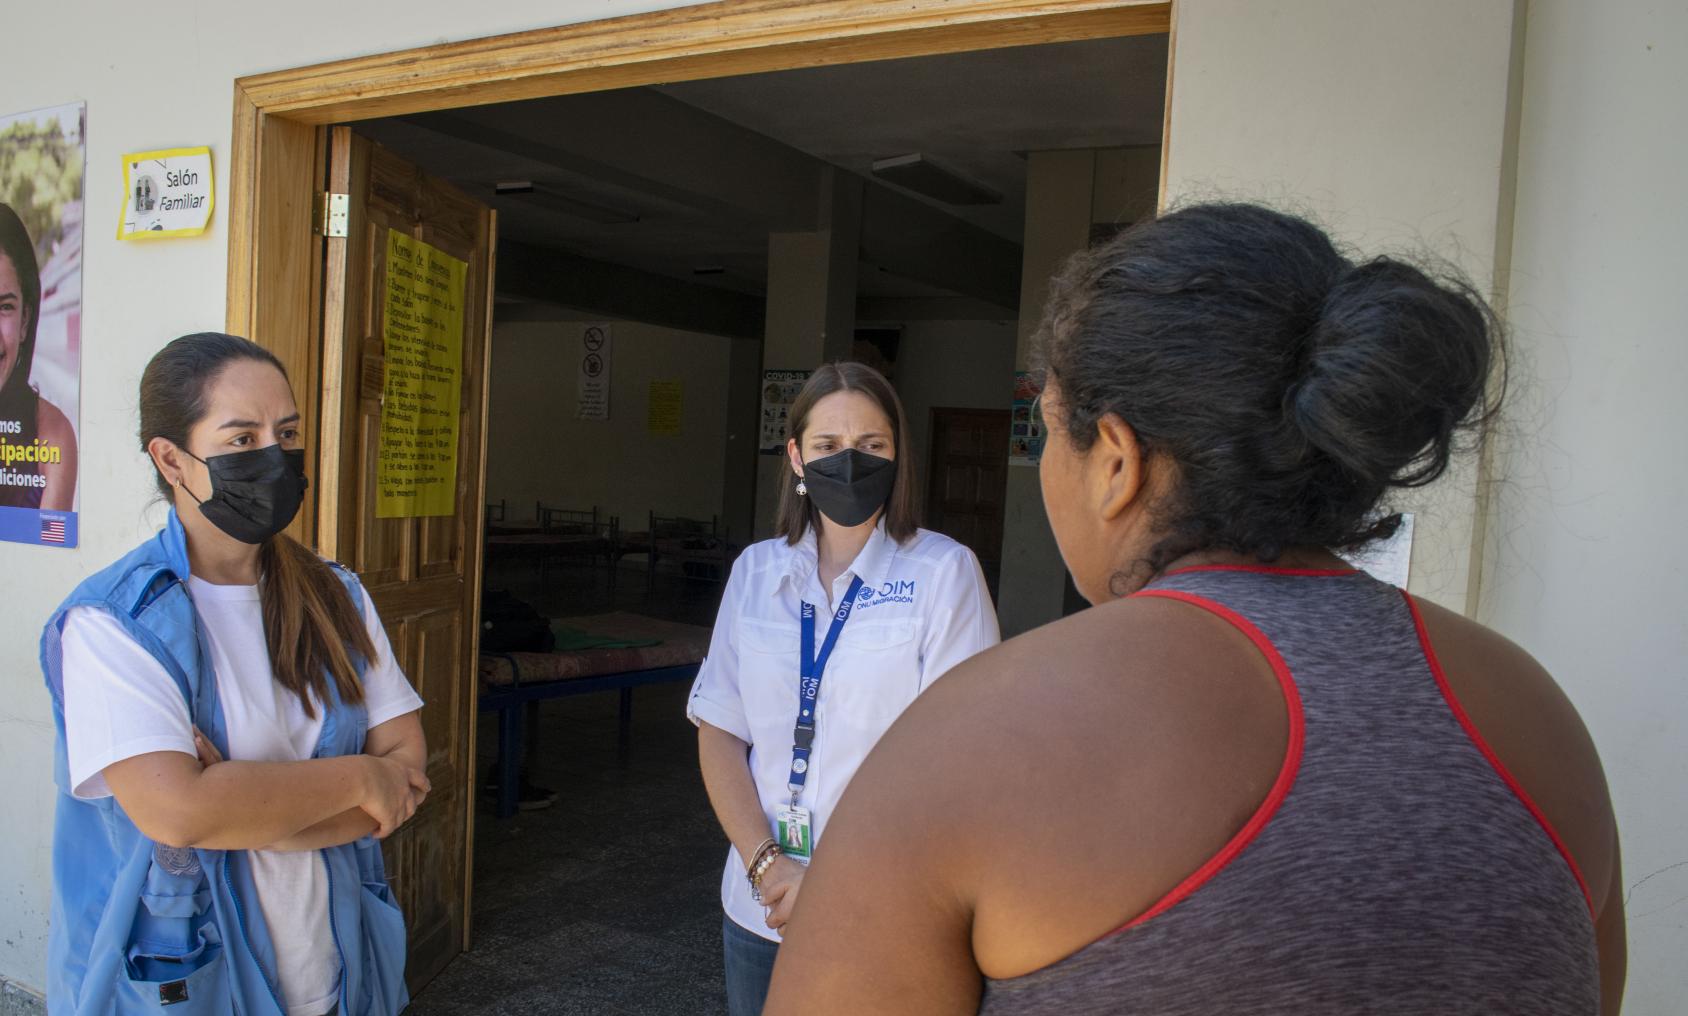 A woman standing with her back to the camera is talking to two people with facemasks, one of them wearing a vest that identifies her as a member of the UN system and the other one wearing an UN ID badge.